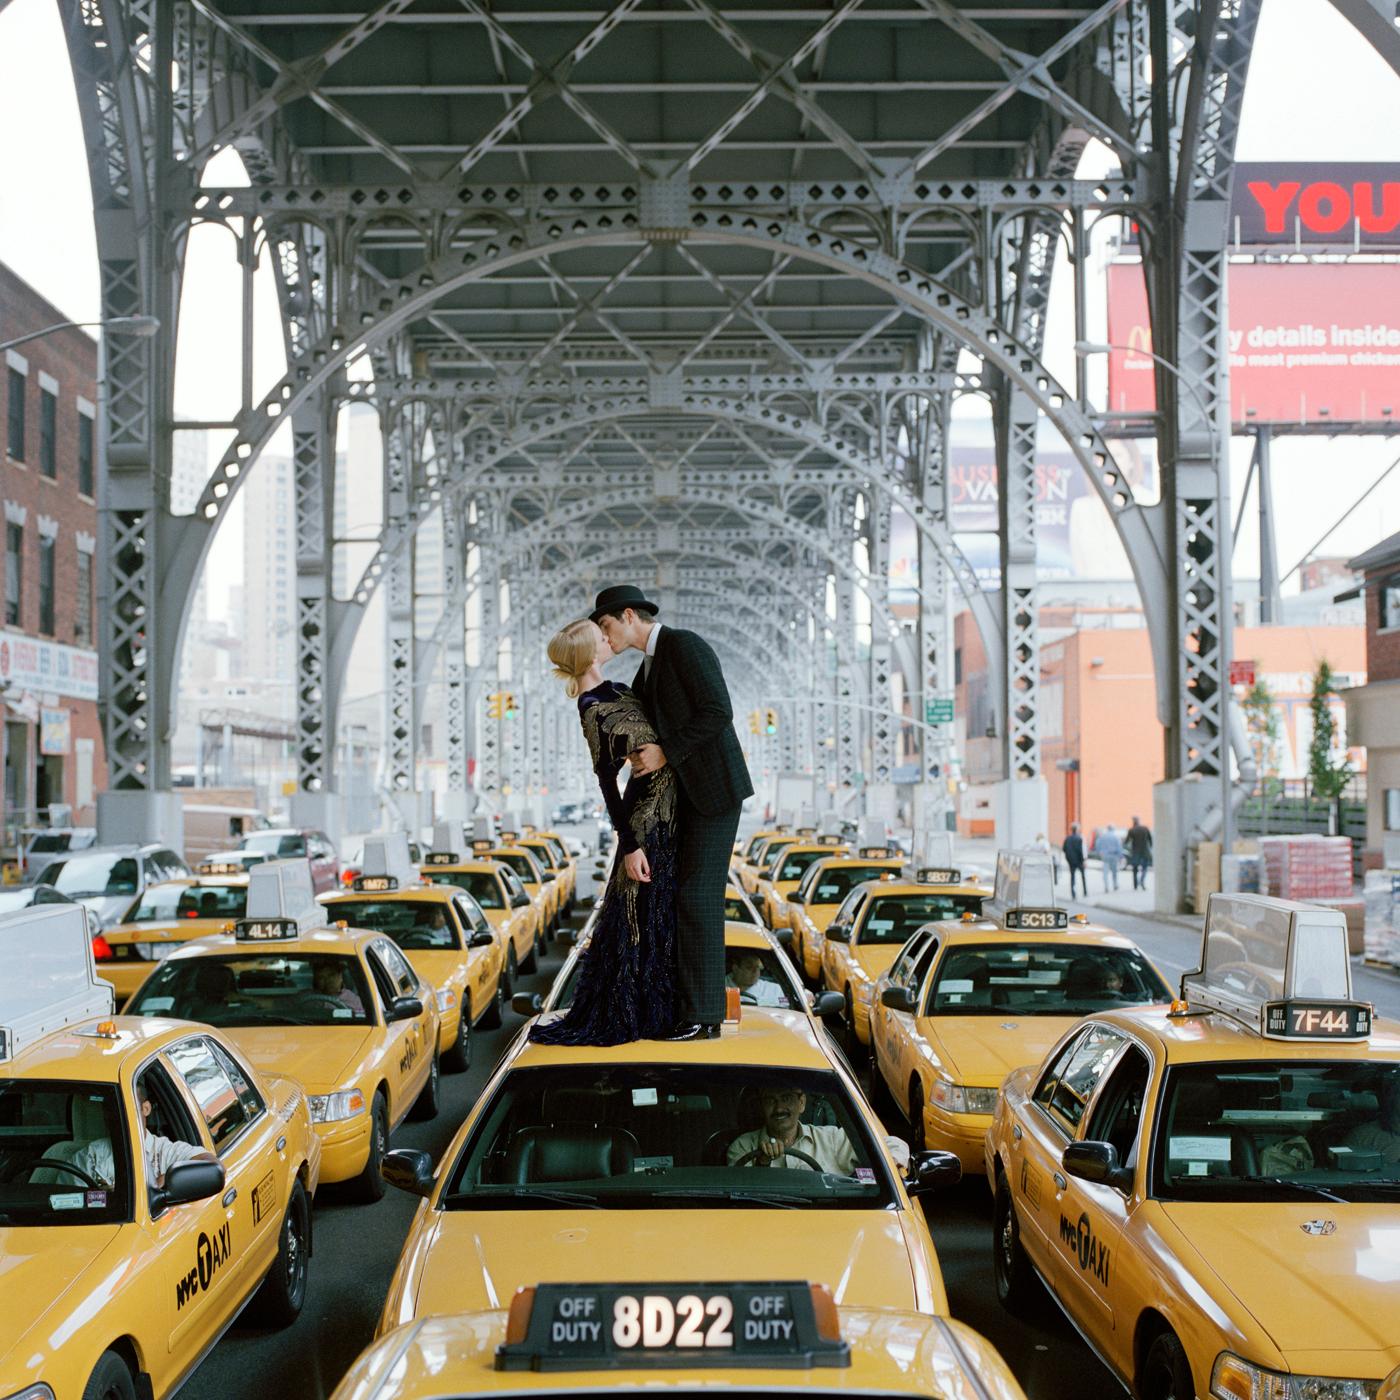 Rodney Smith Figurative Photograph - Edythe and Andrew Kissing on Top of Taxis, New York, New York - 20 x 20 inches